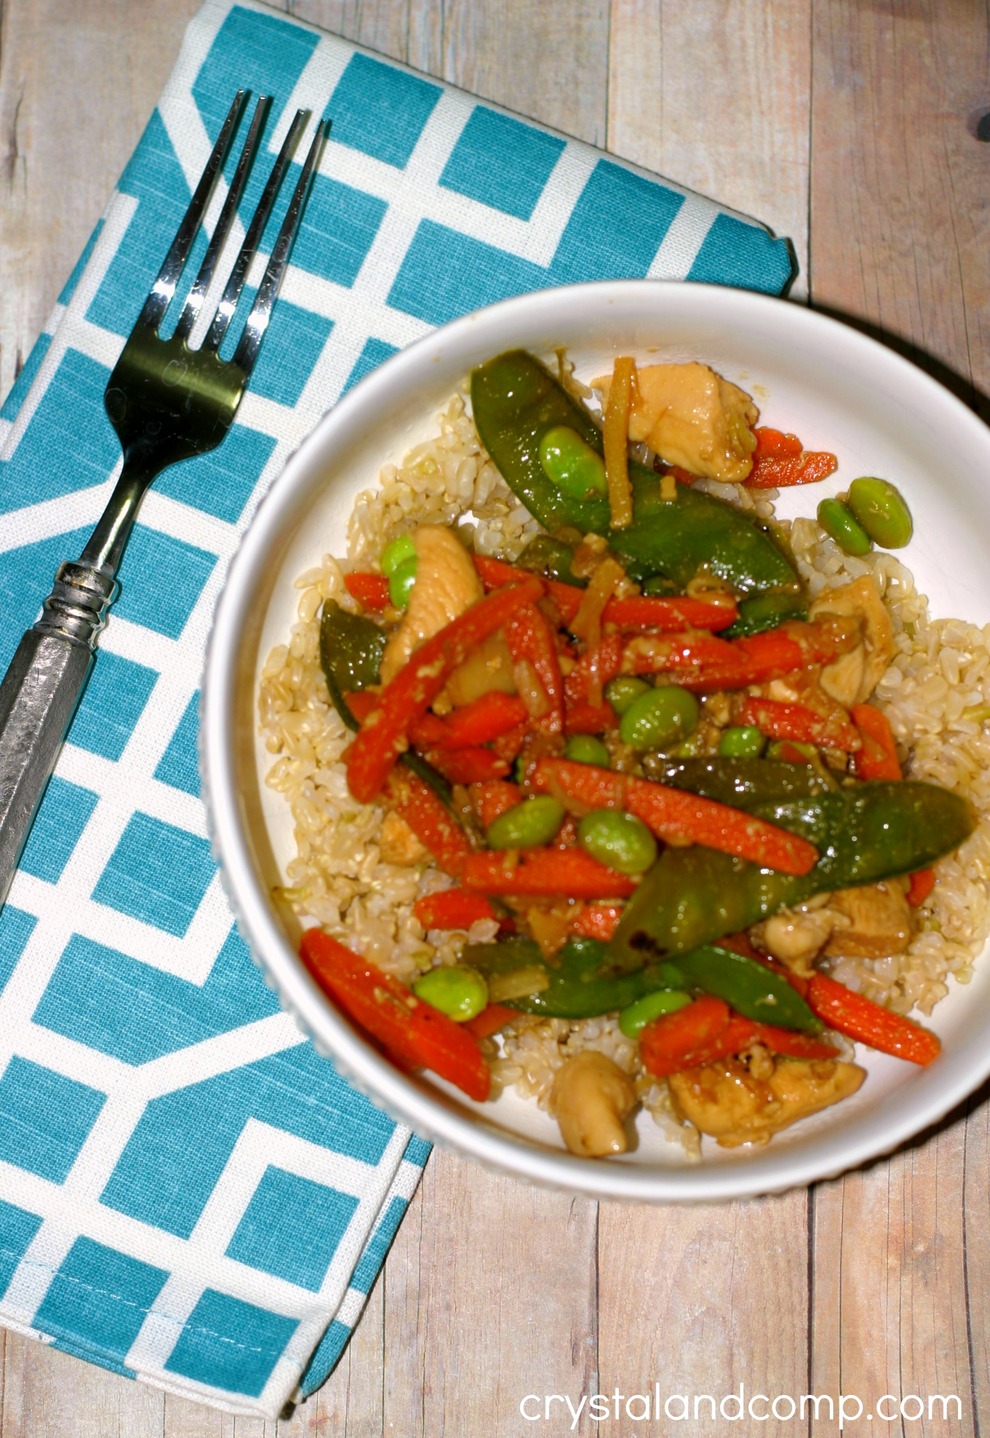 Easy Recipes: Chicken Stir Fry in 30 Minutes